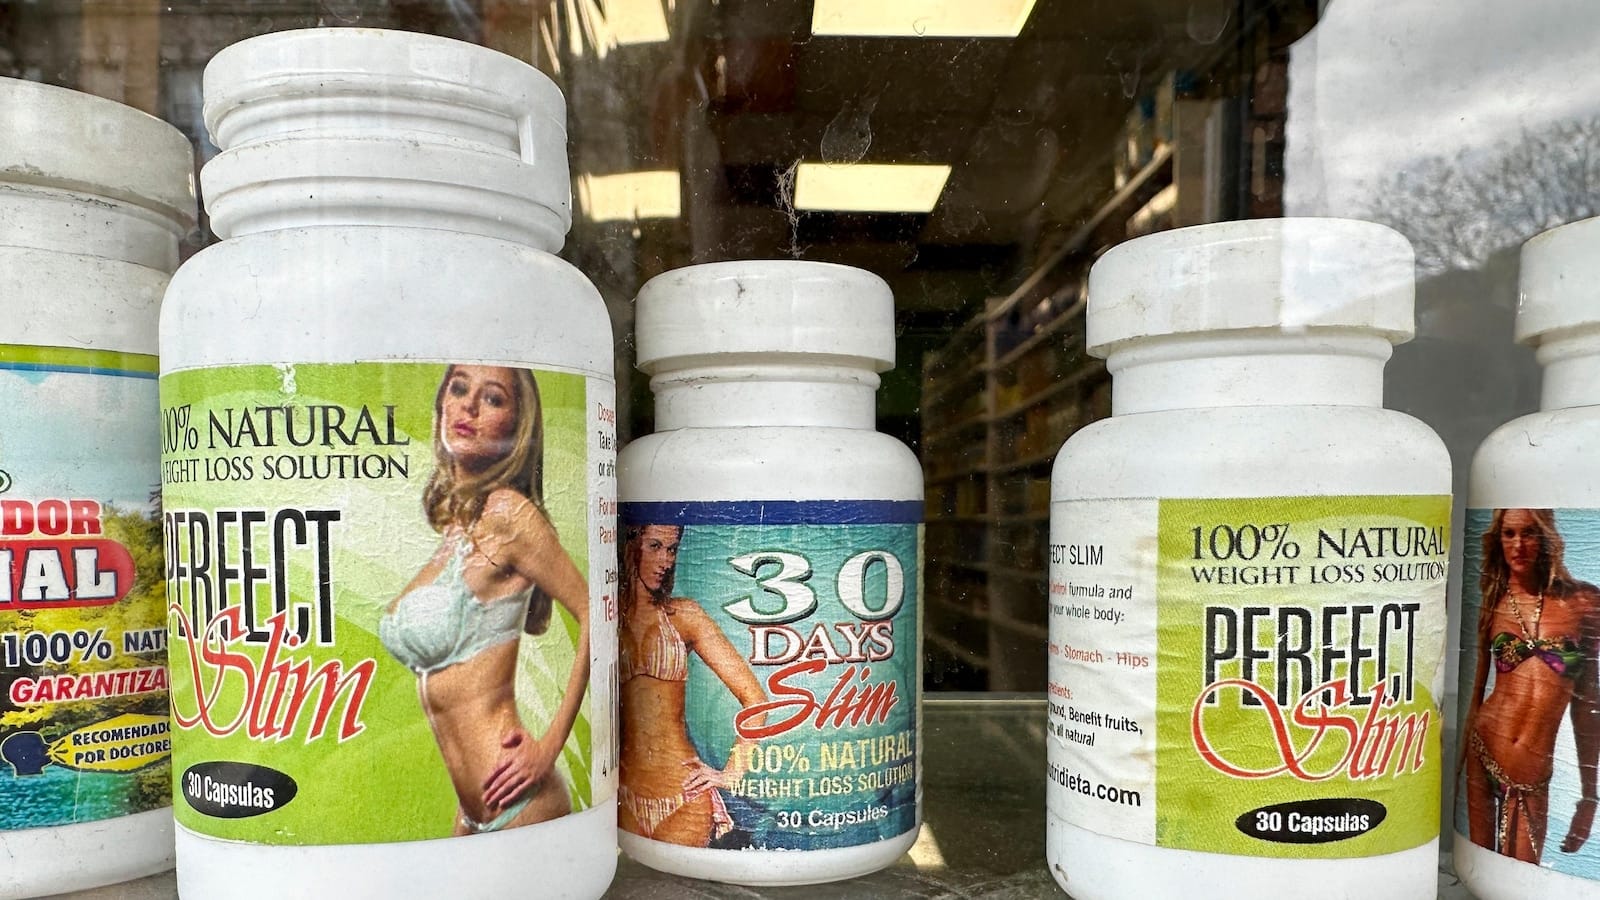 Selling weight-loss and muscle-building supplements to minors in New York is now illegal